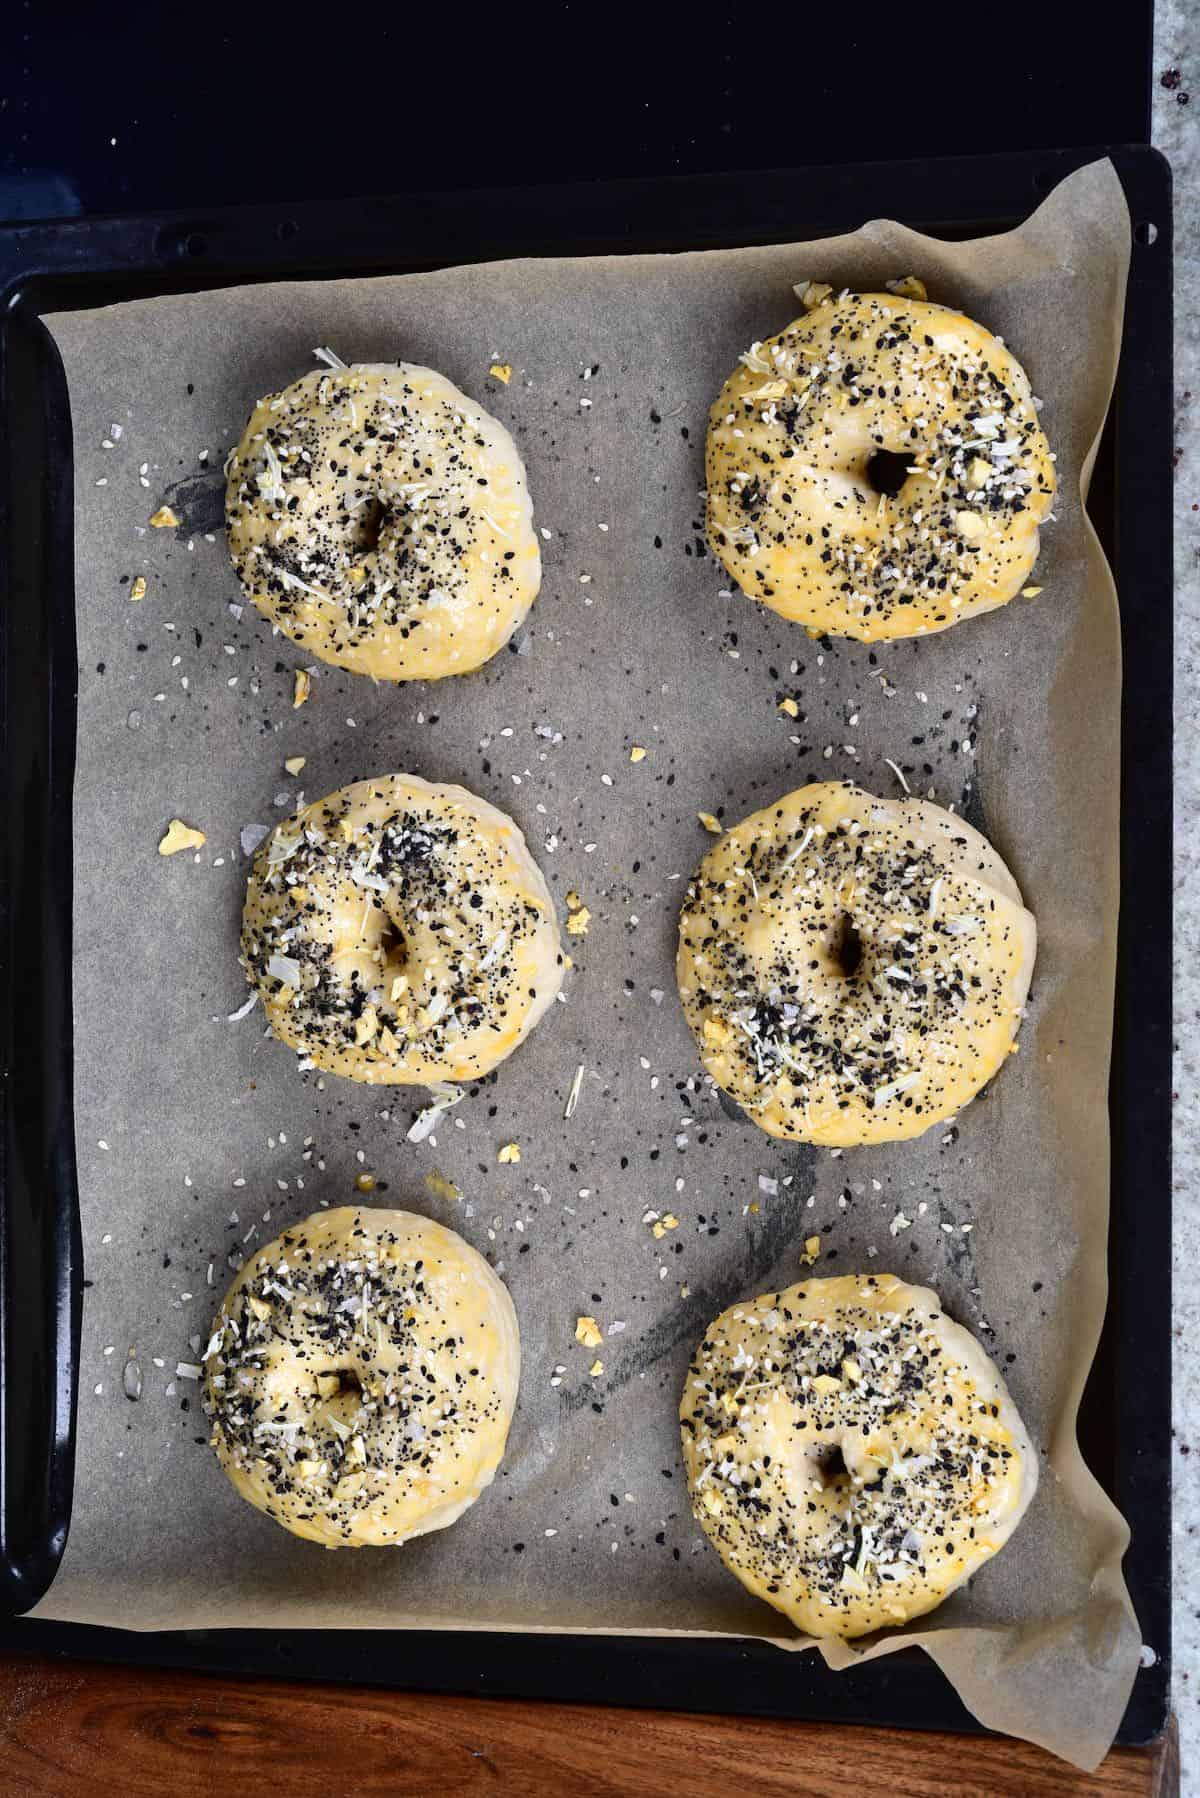 Six bagels in a baking tray ready to bake